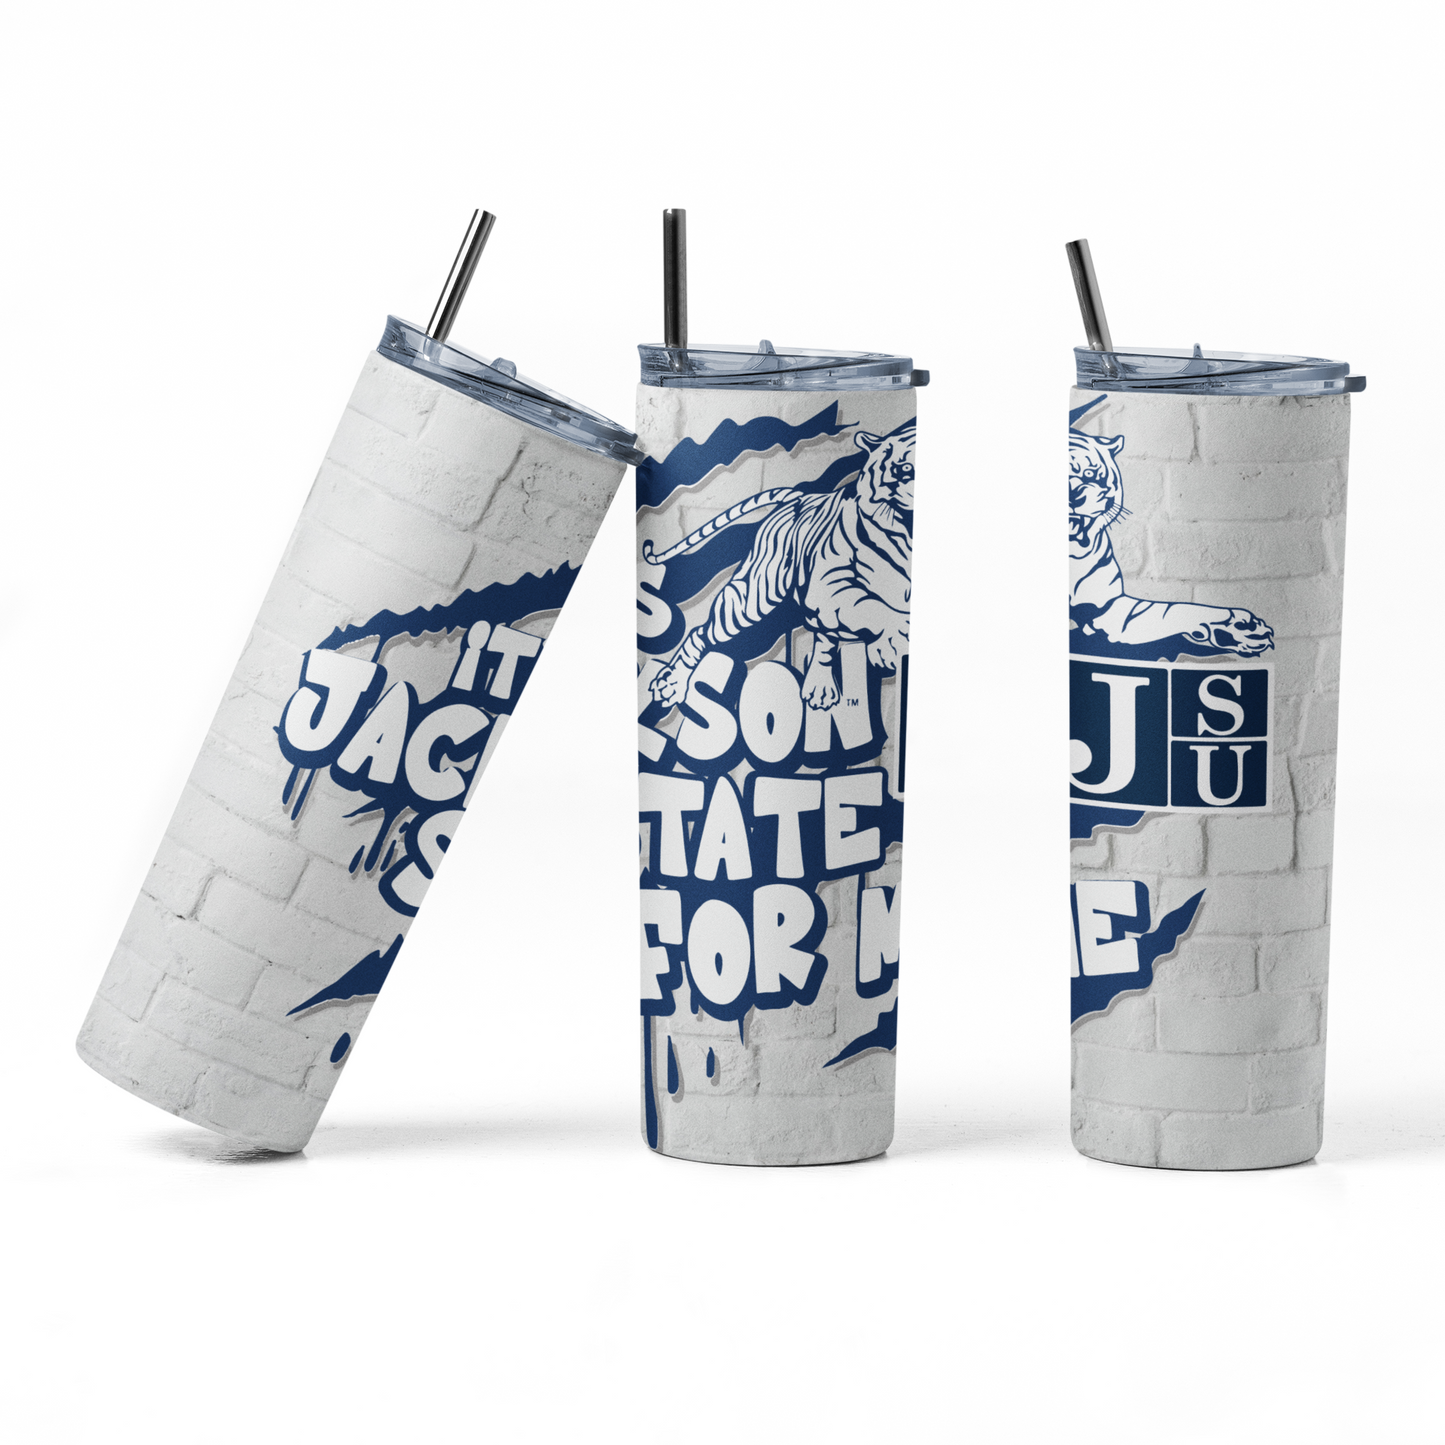 20oz HBCU Tumbler Collection: Bethune Cookman, Alcorn State, Jackson State U, Morgan State U | Gifts for All | Beverage